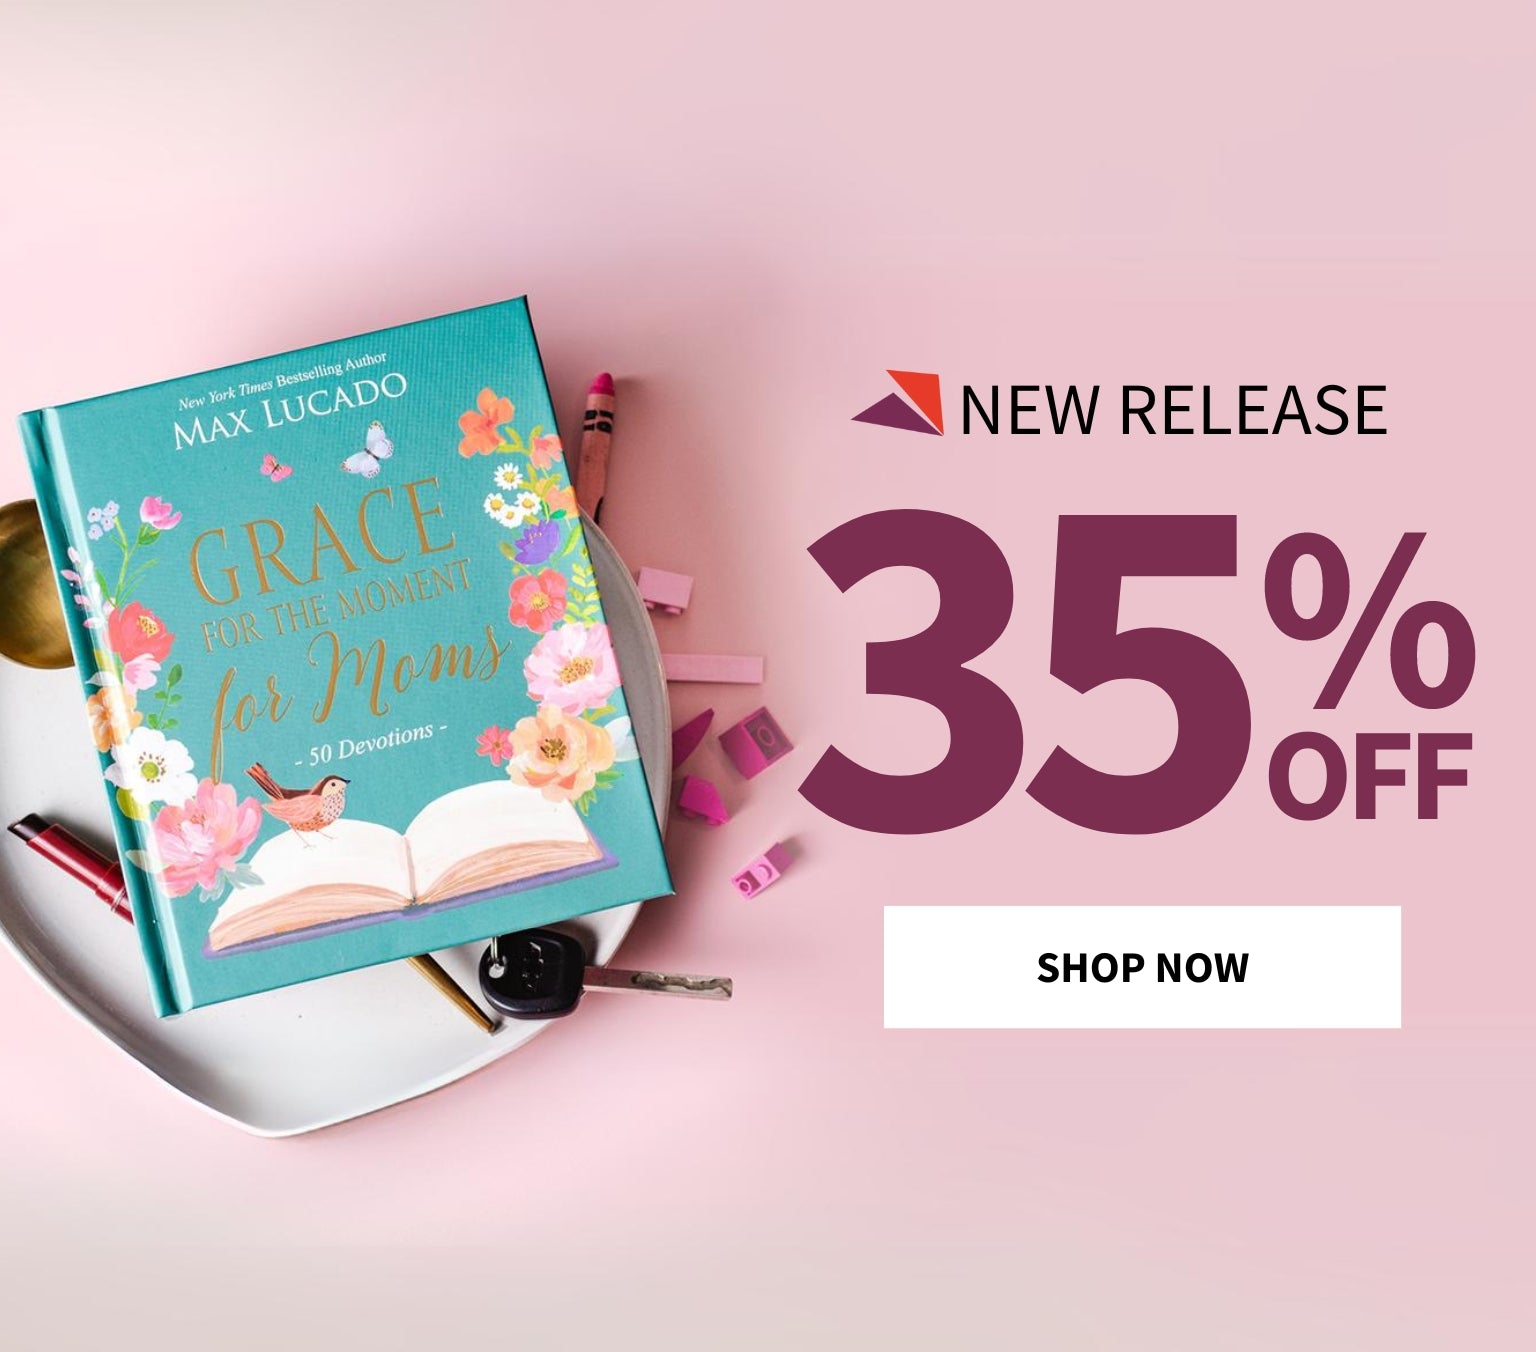 Grace for the Moment for Moms by Max Lucado New Release 35% Off